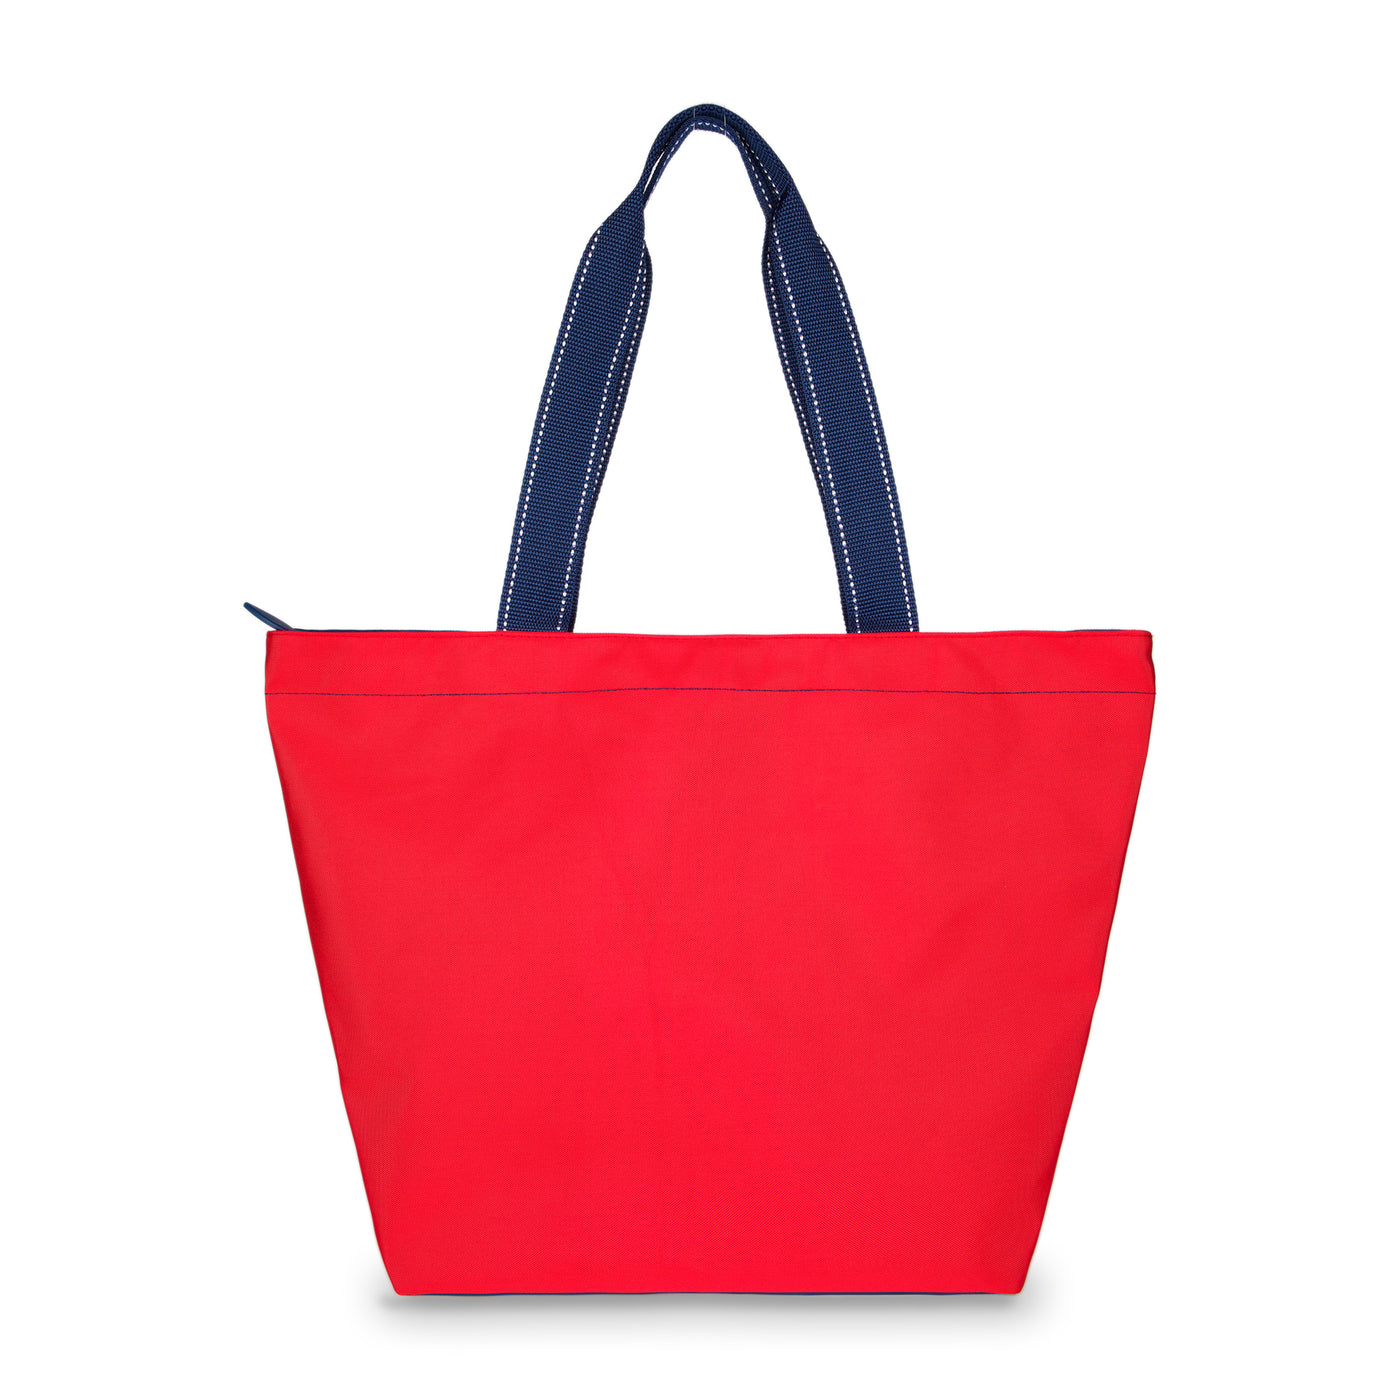 red nylon tote bag with navy straps